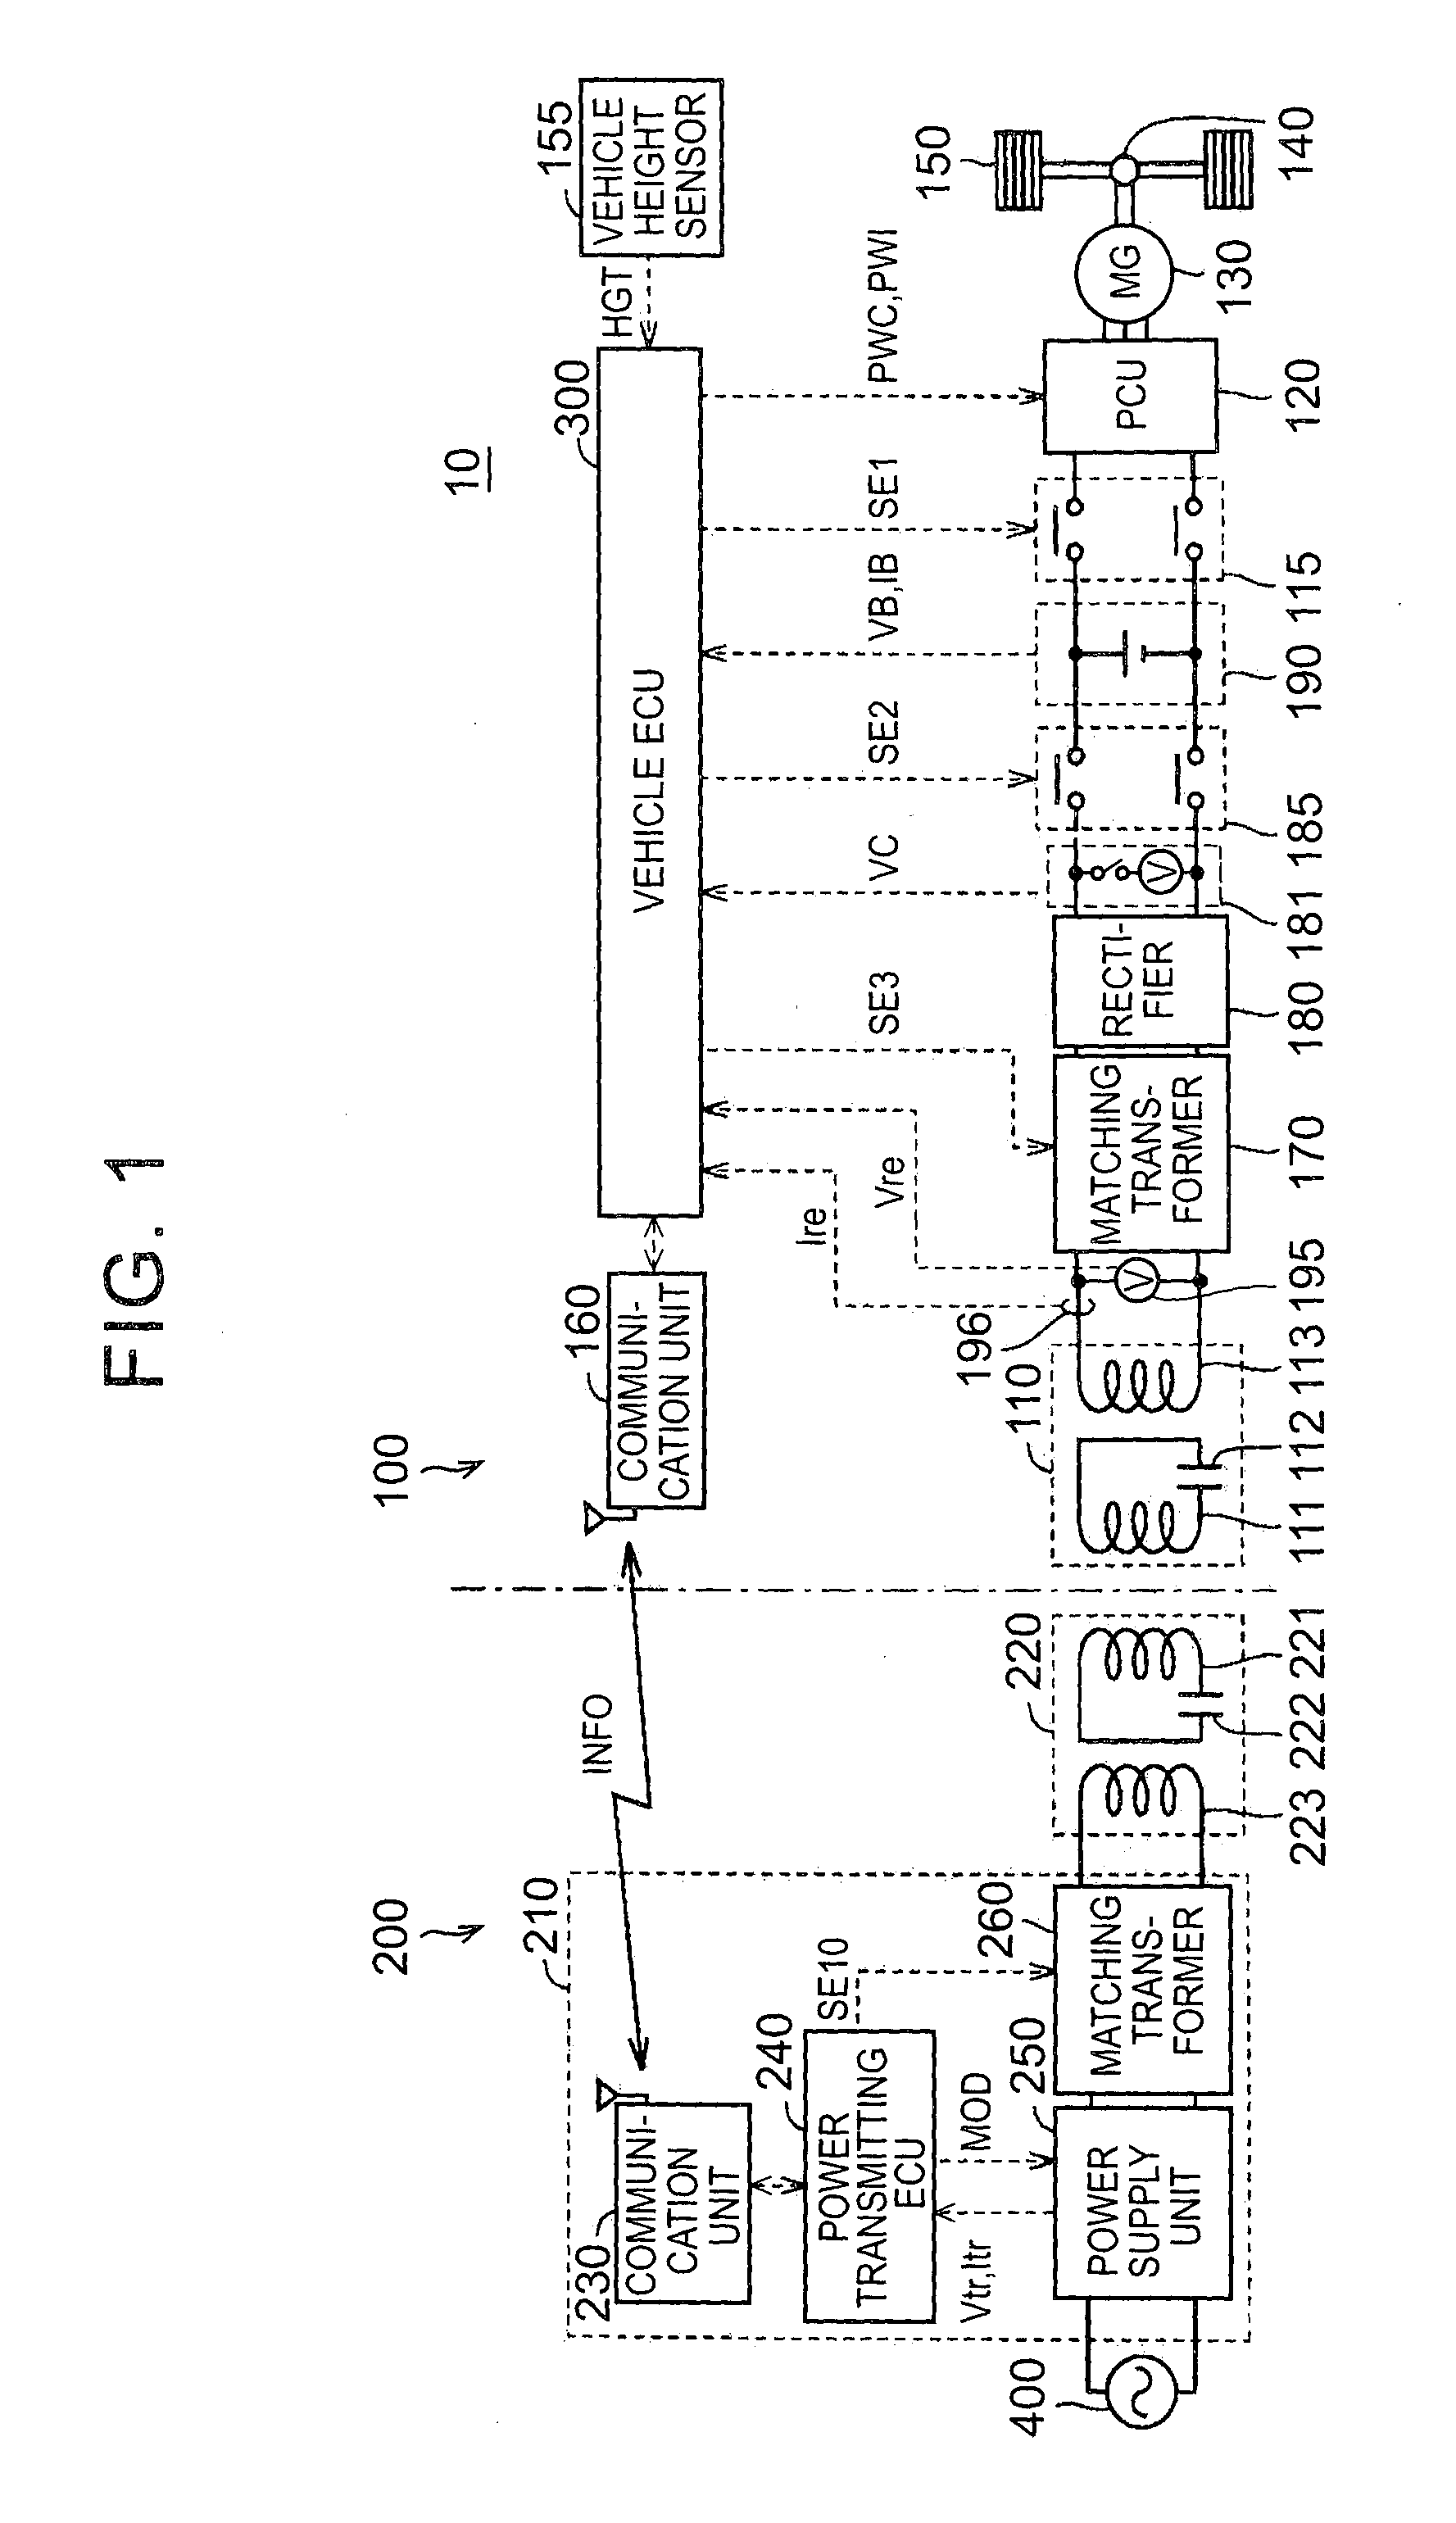 Vehicle and contactless power supply system